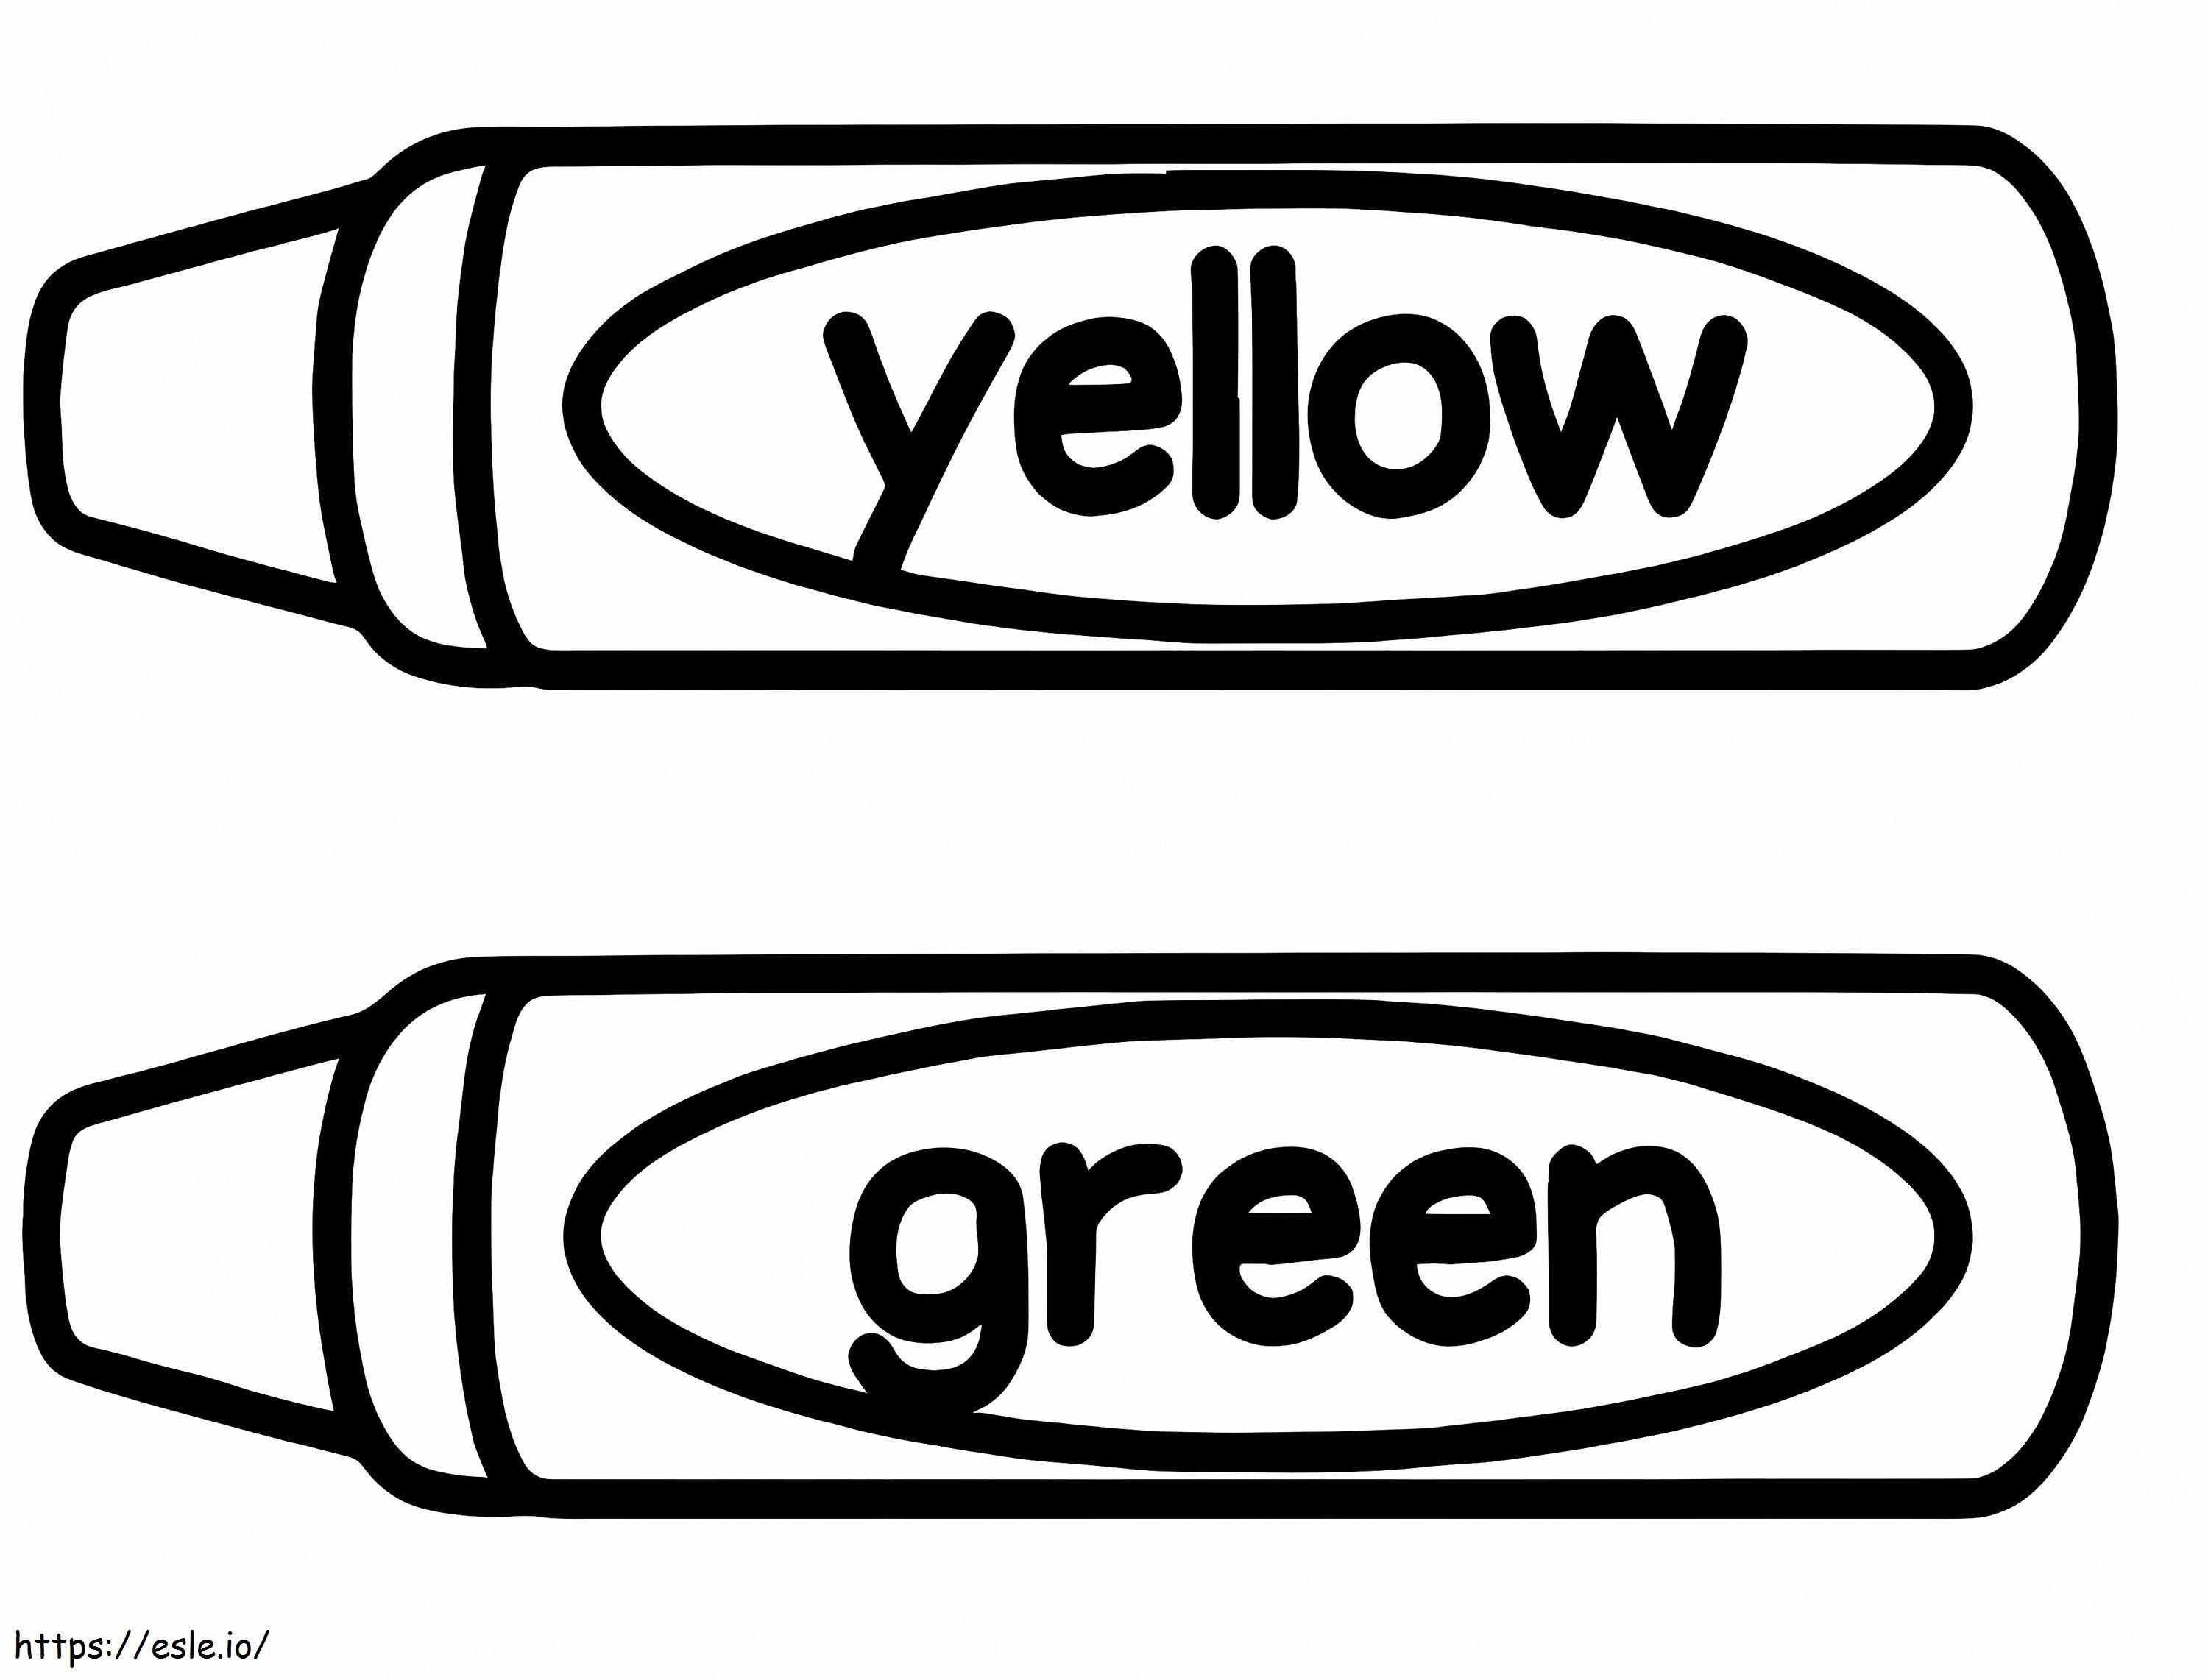 Yellow And Green Crayons coloring page